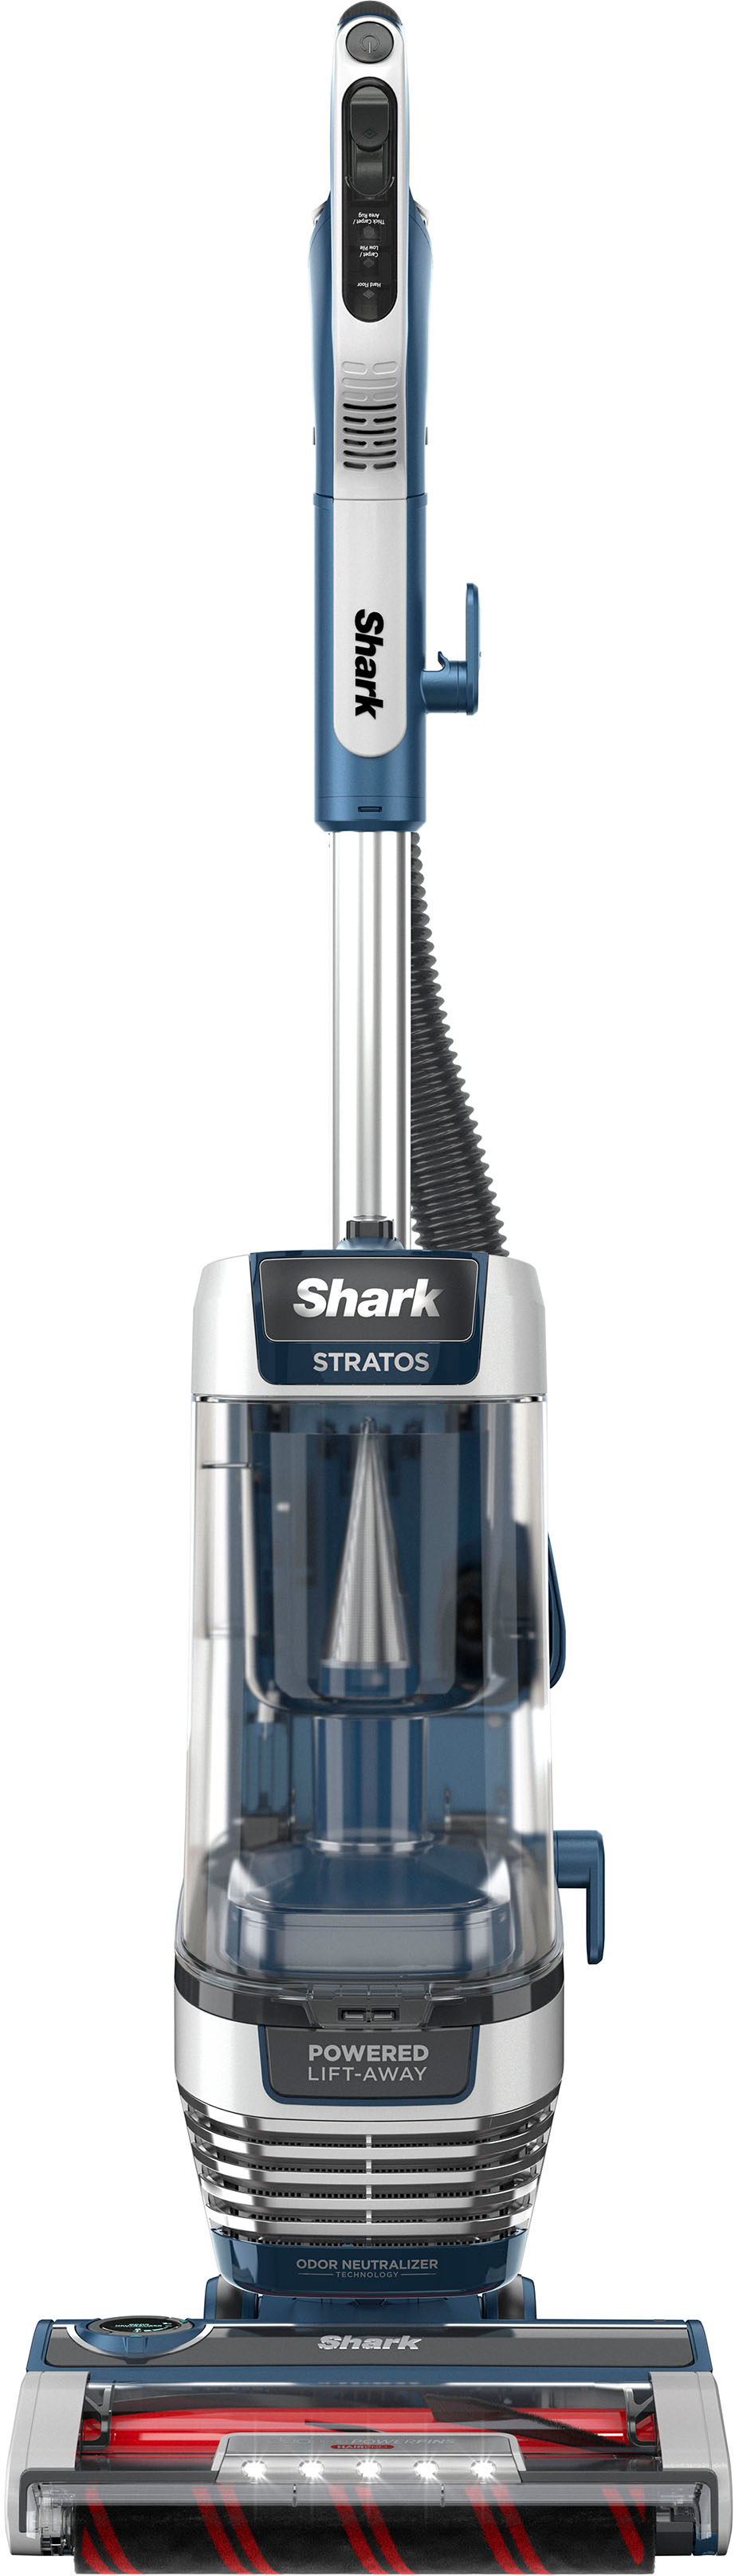 Shark Vacuum Cleaners Latest Offers